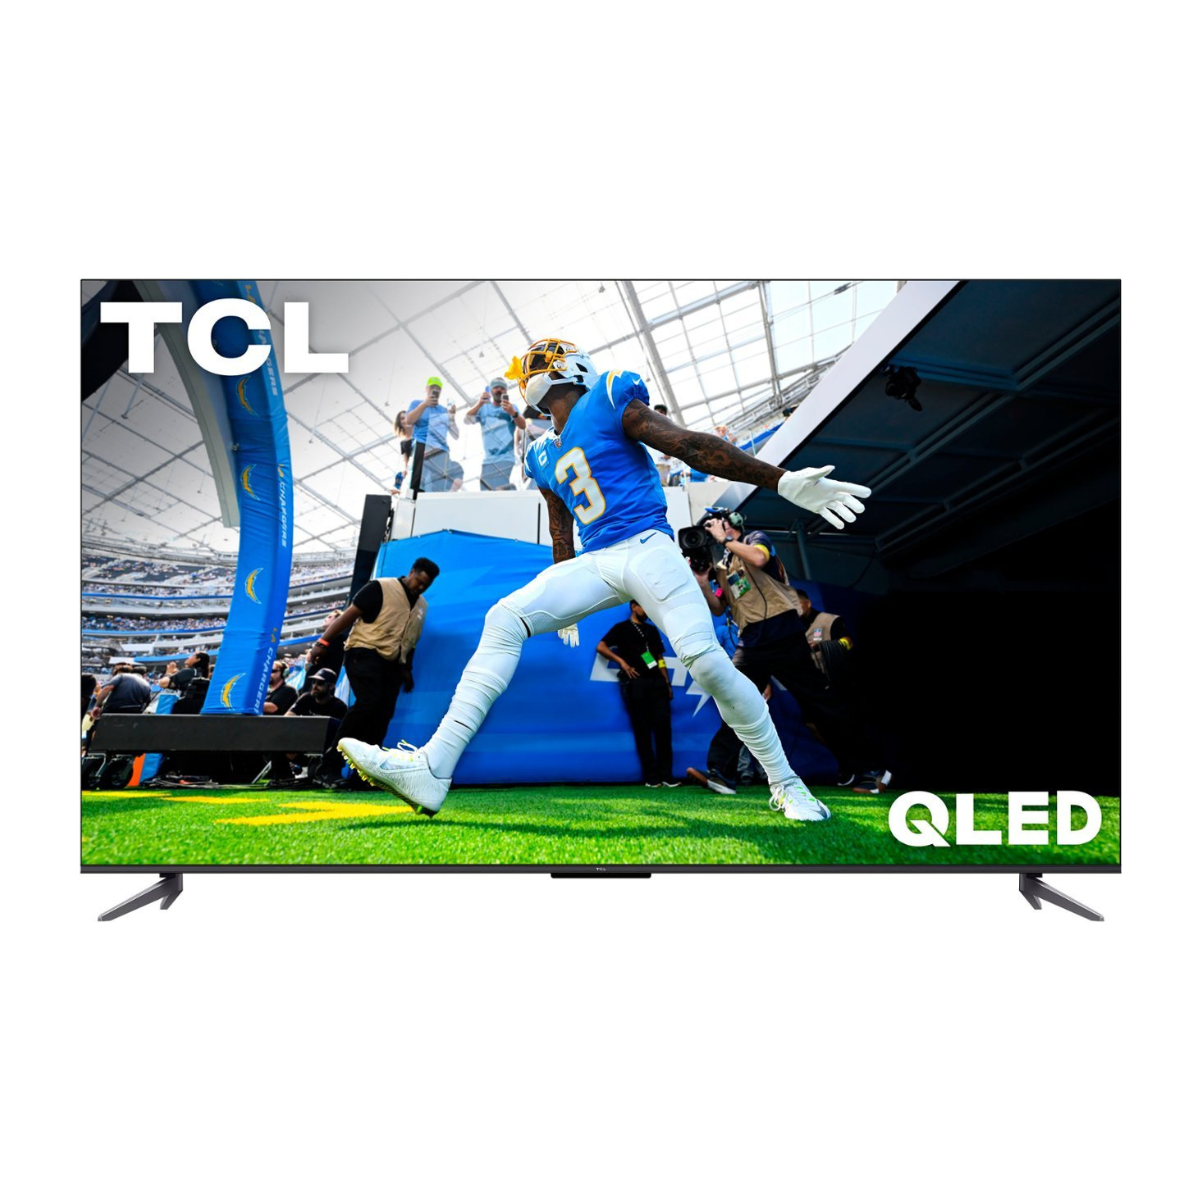 The TCL Q6 Series